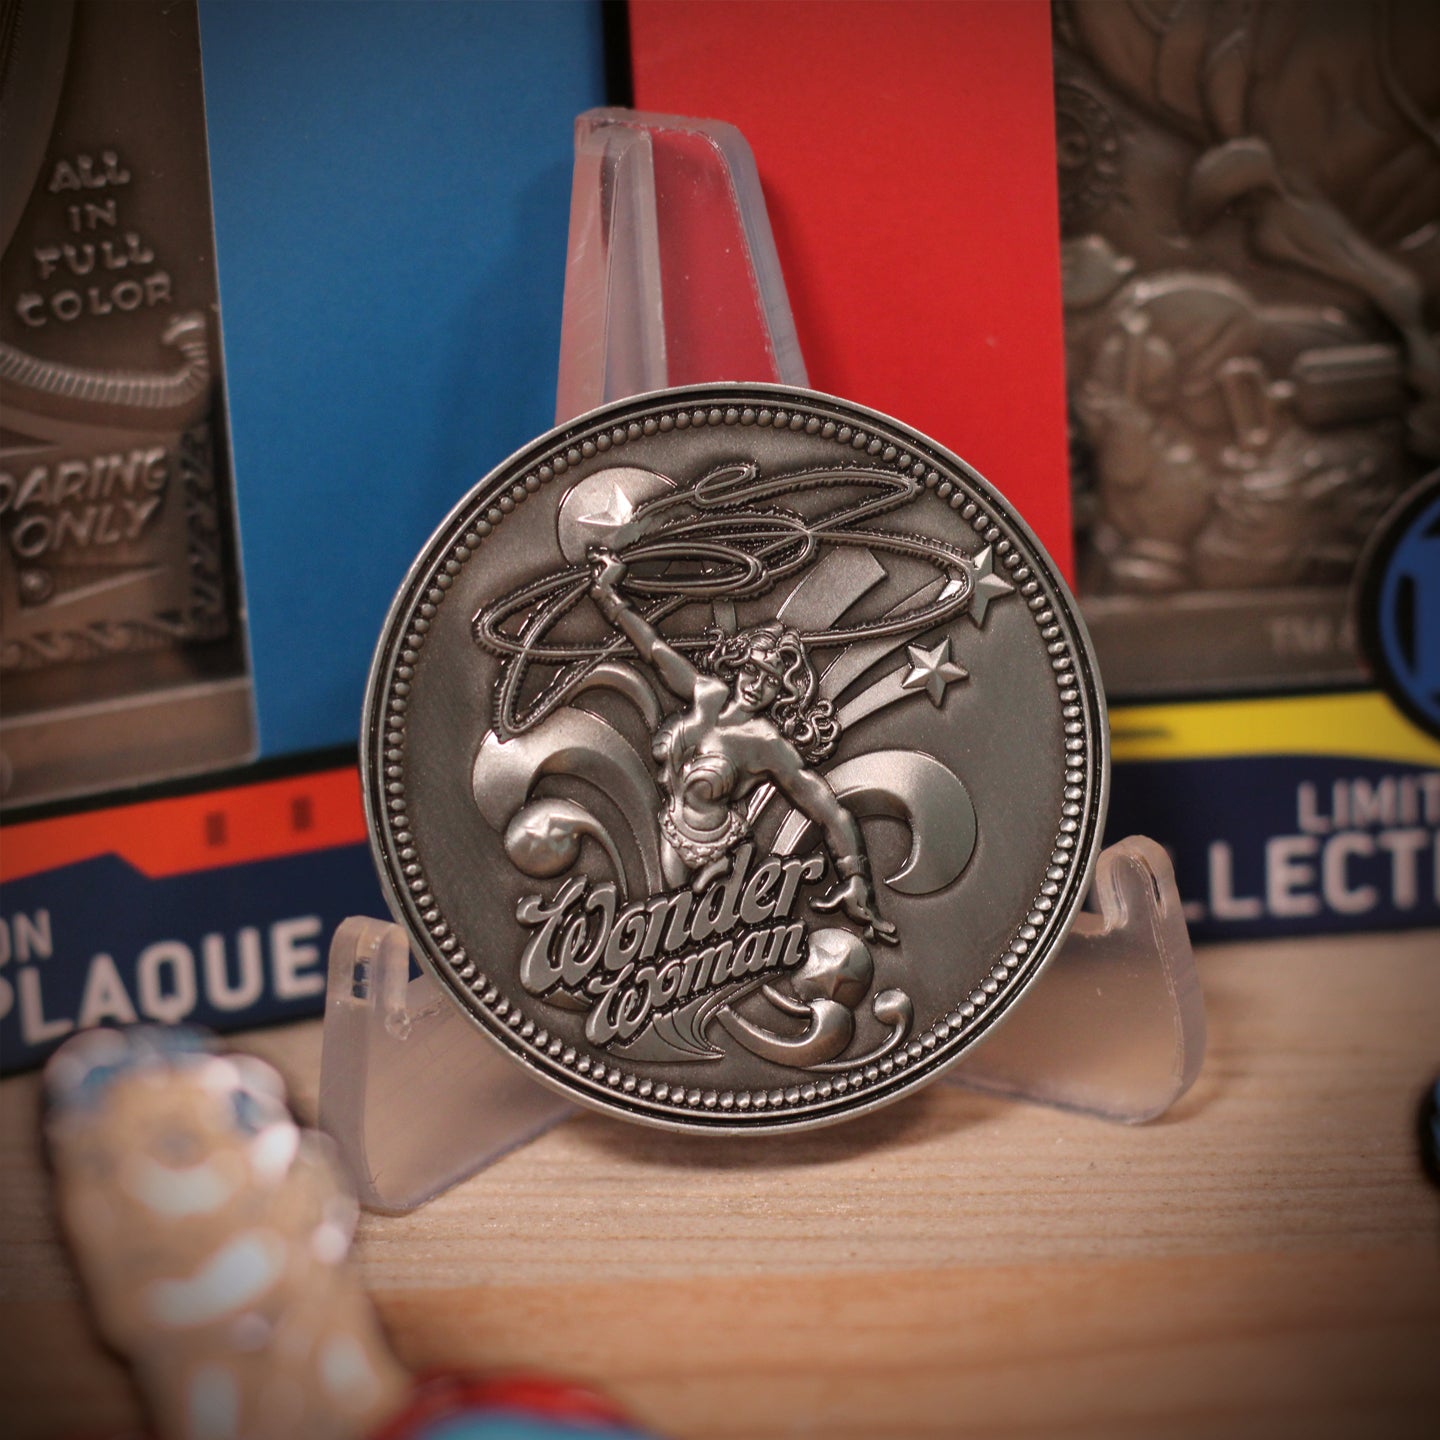 DC Comics Wonder Woman Limited Edition Collectible Coin